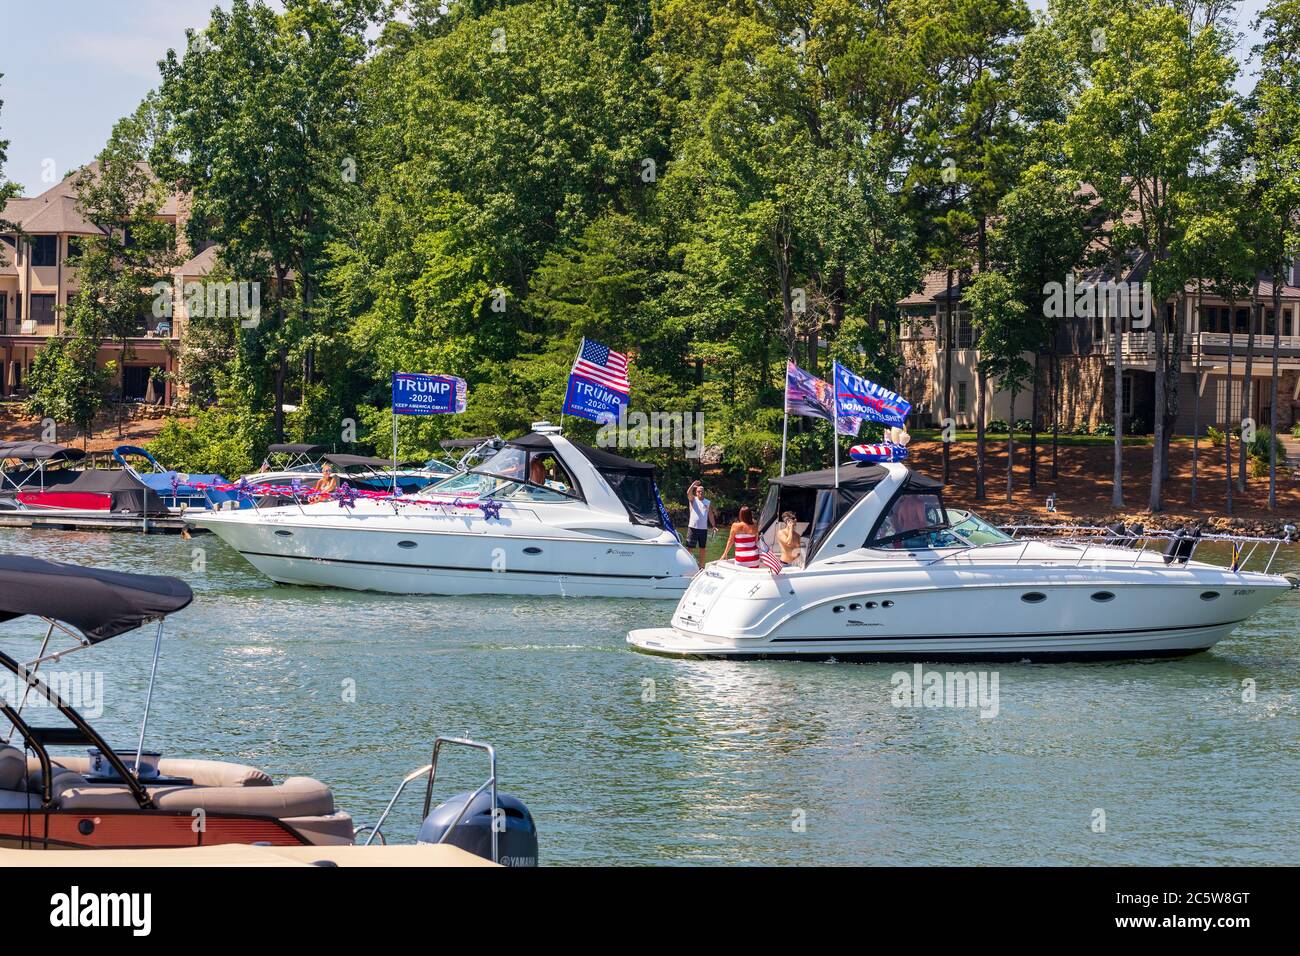 Mooresville, NC, USA - July 4, 2020: Boats flying Trump 2020 flags for President Donald Trump on Lake Norman near the Trump National Golf Club Charlot Stock Photo